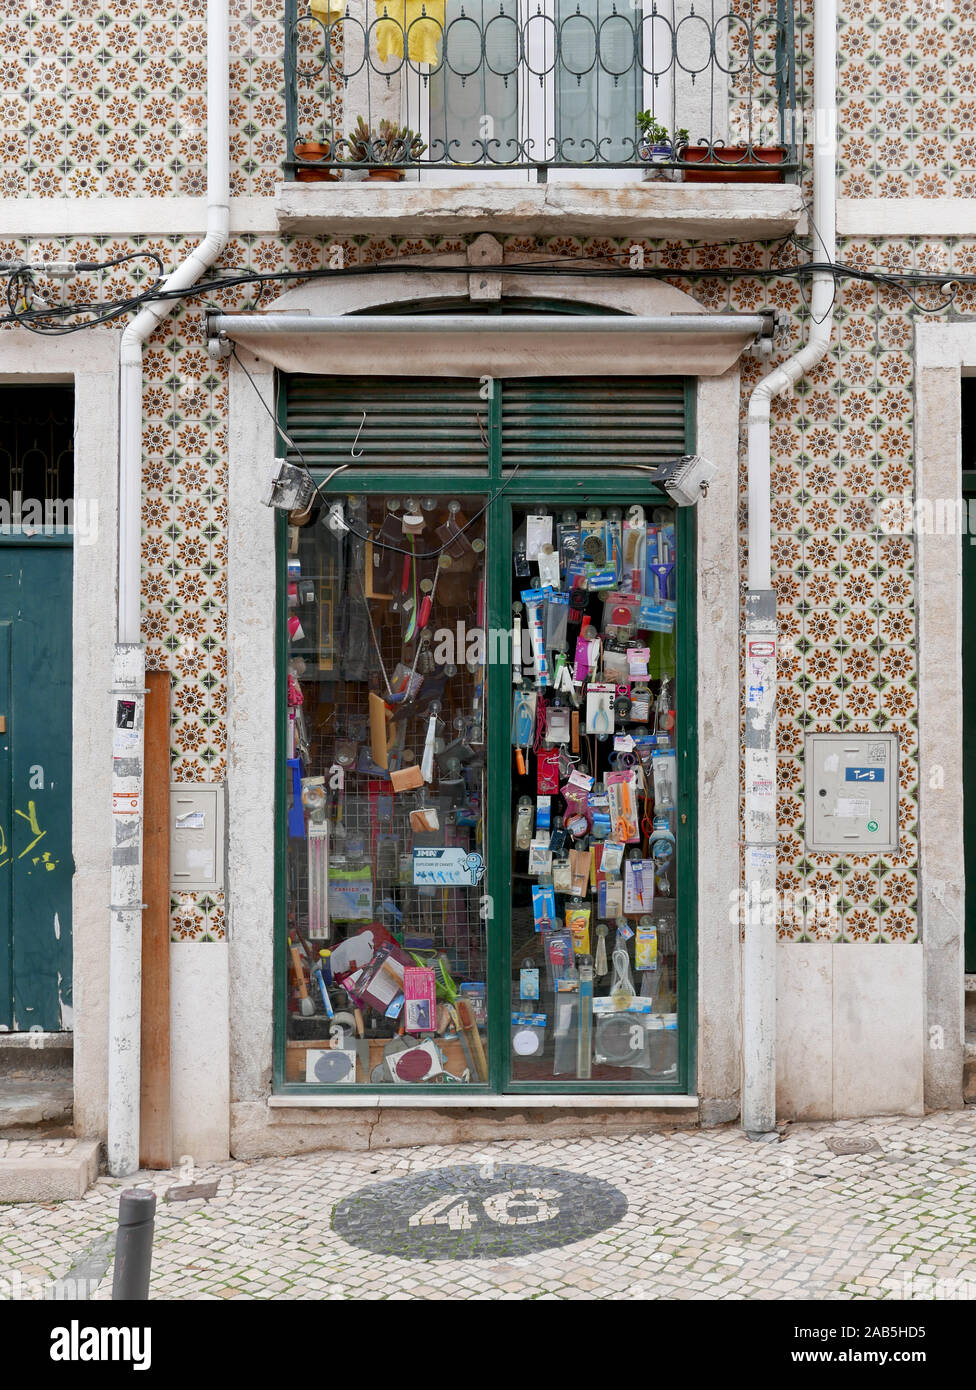 Glazed double doors to a shopfront in Lisbon, Portugal with things hanging in the window Stock Photo